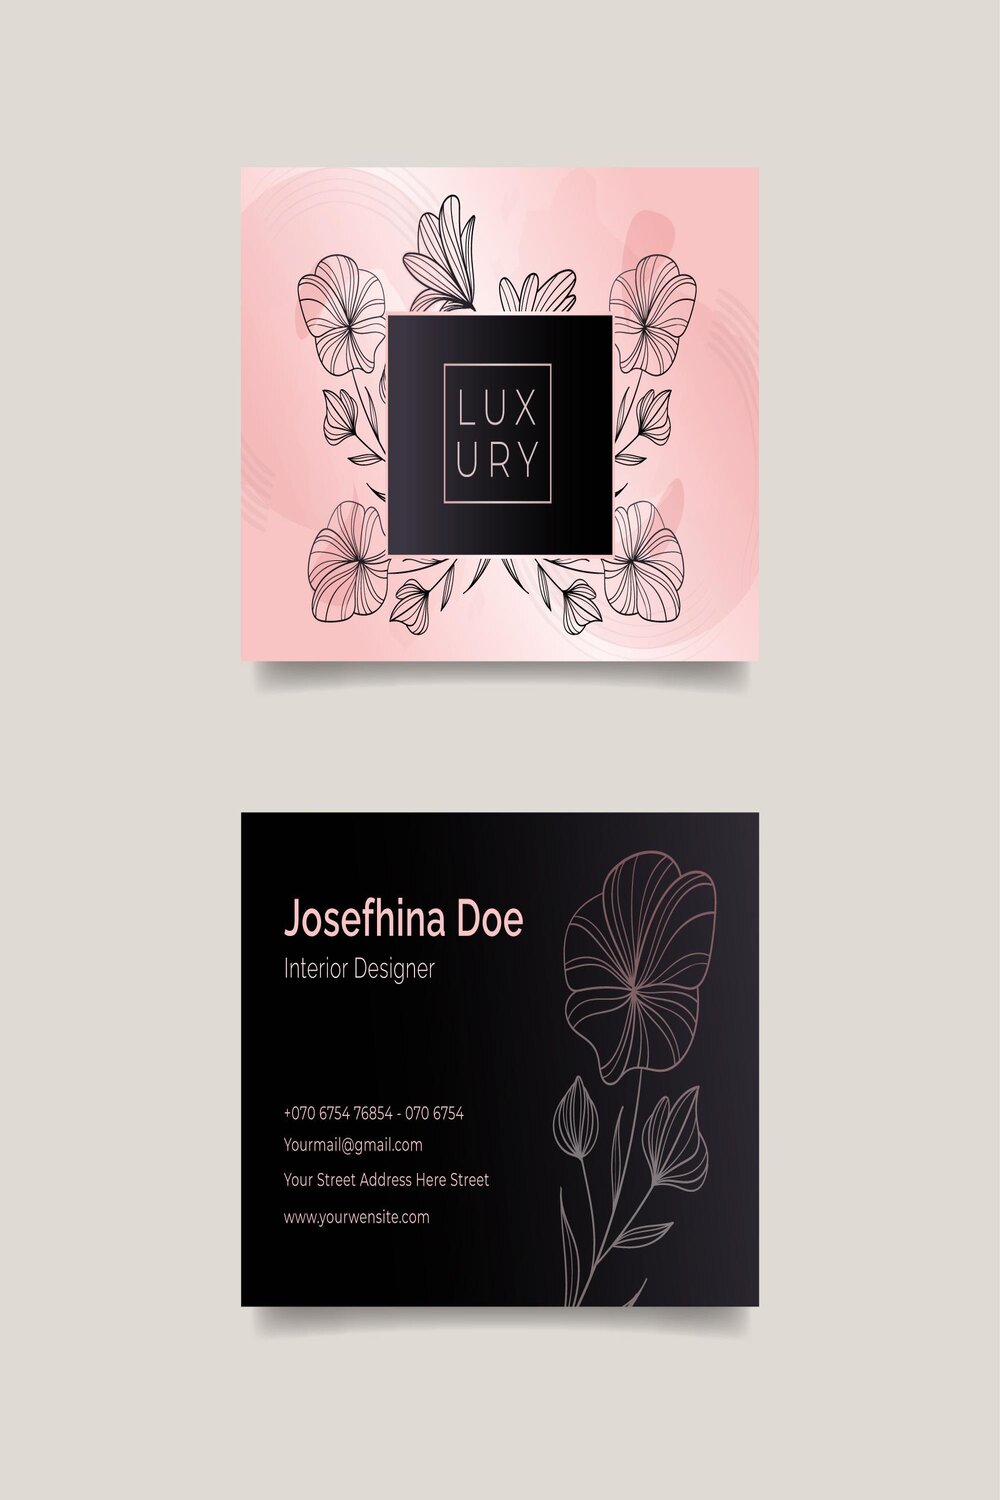 Adorable image of double sided business card template with flower outlines.